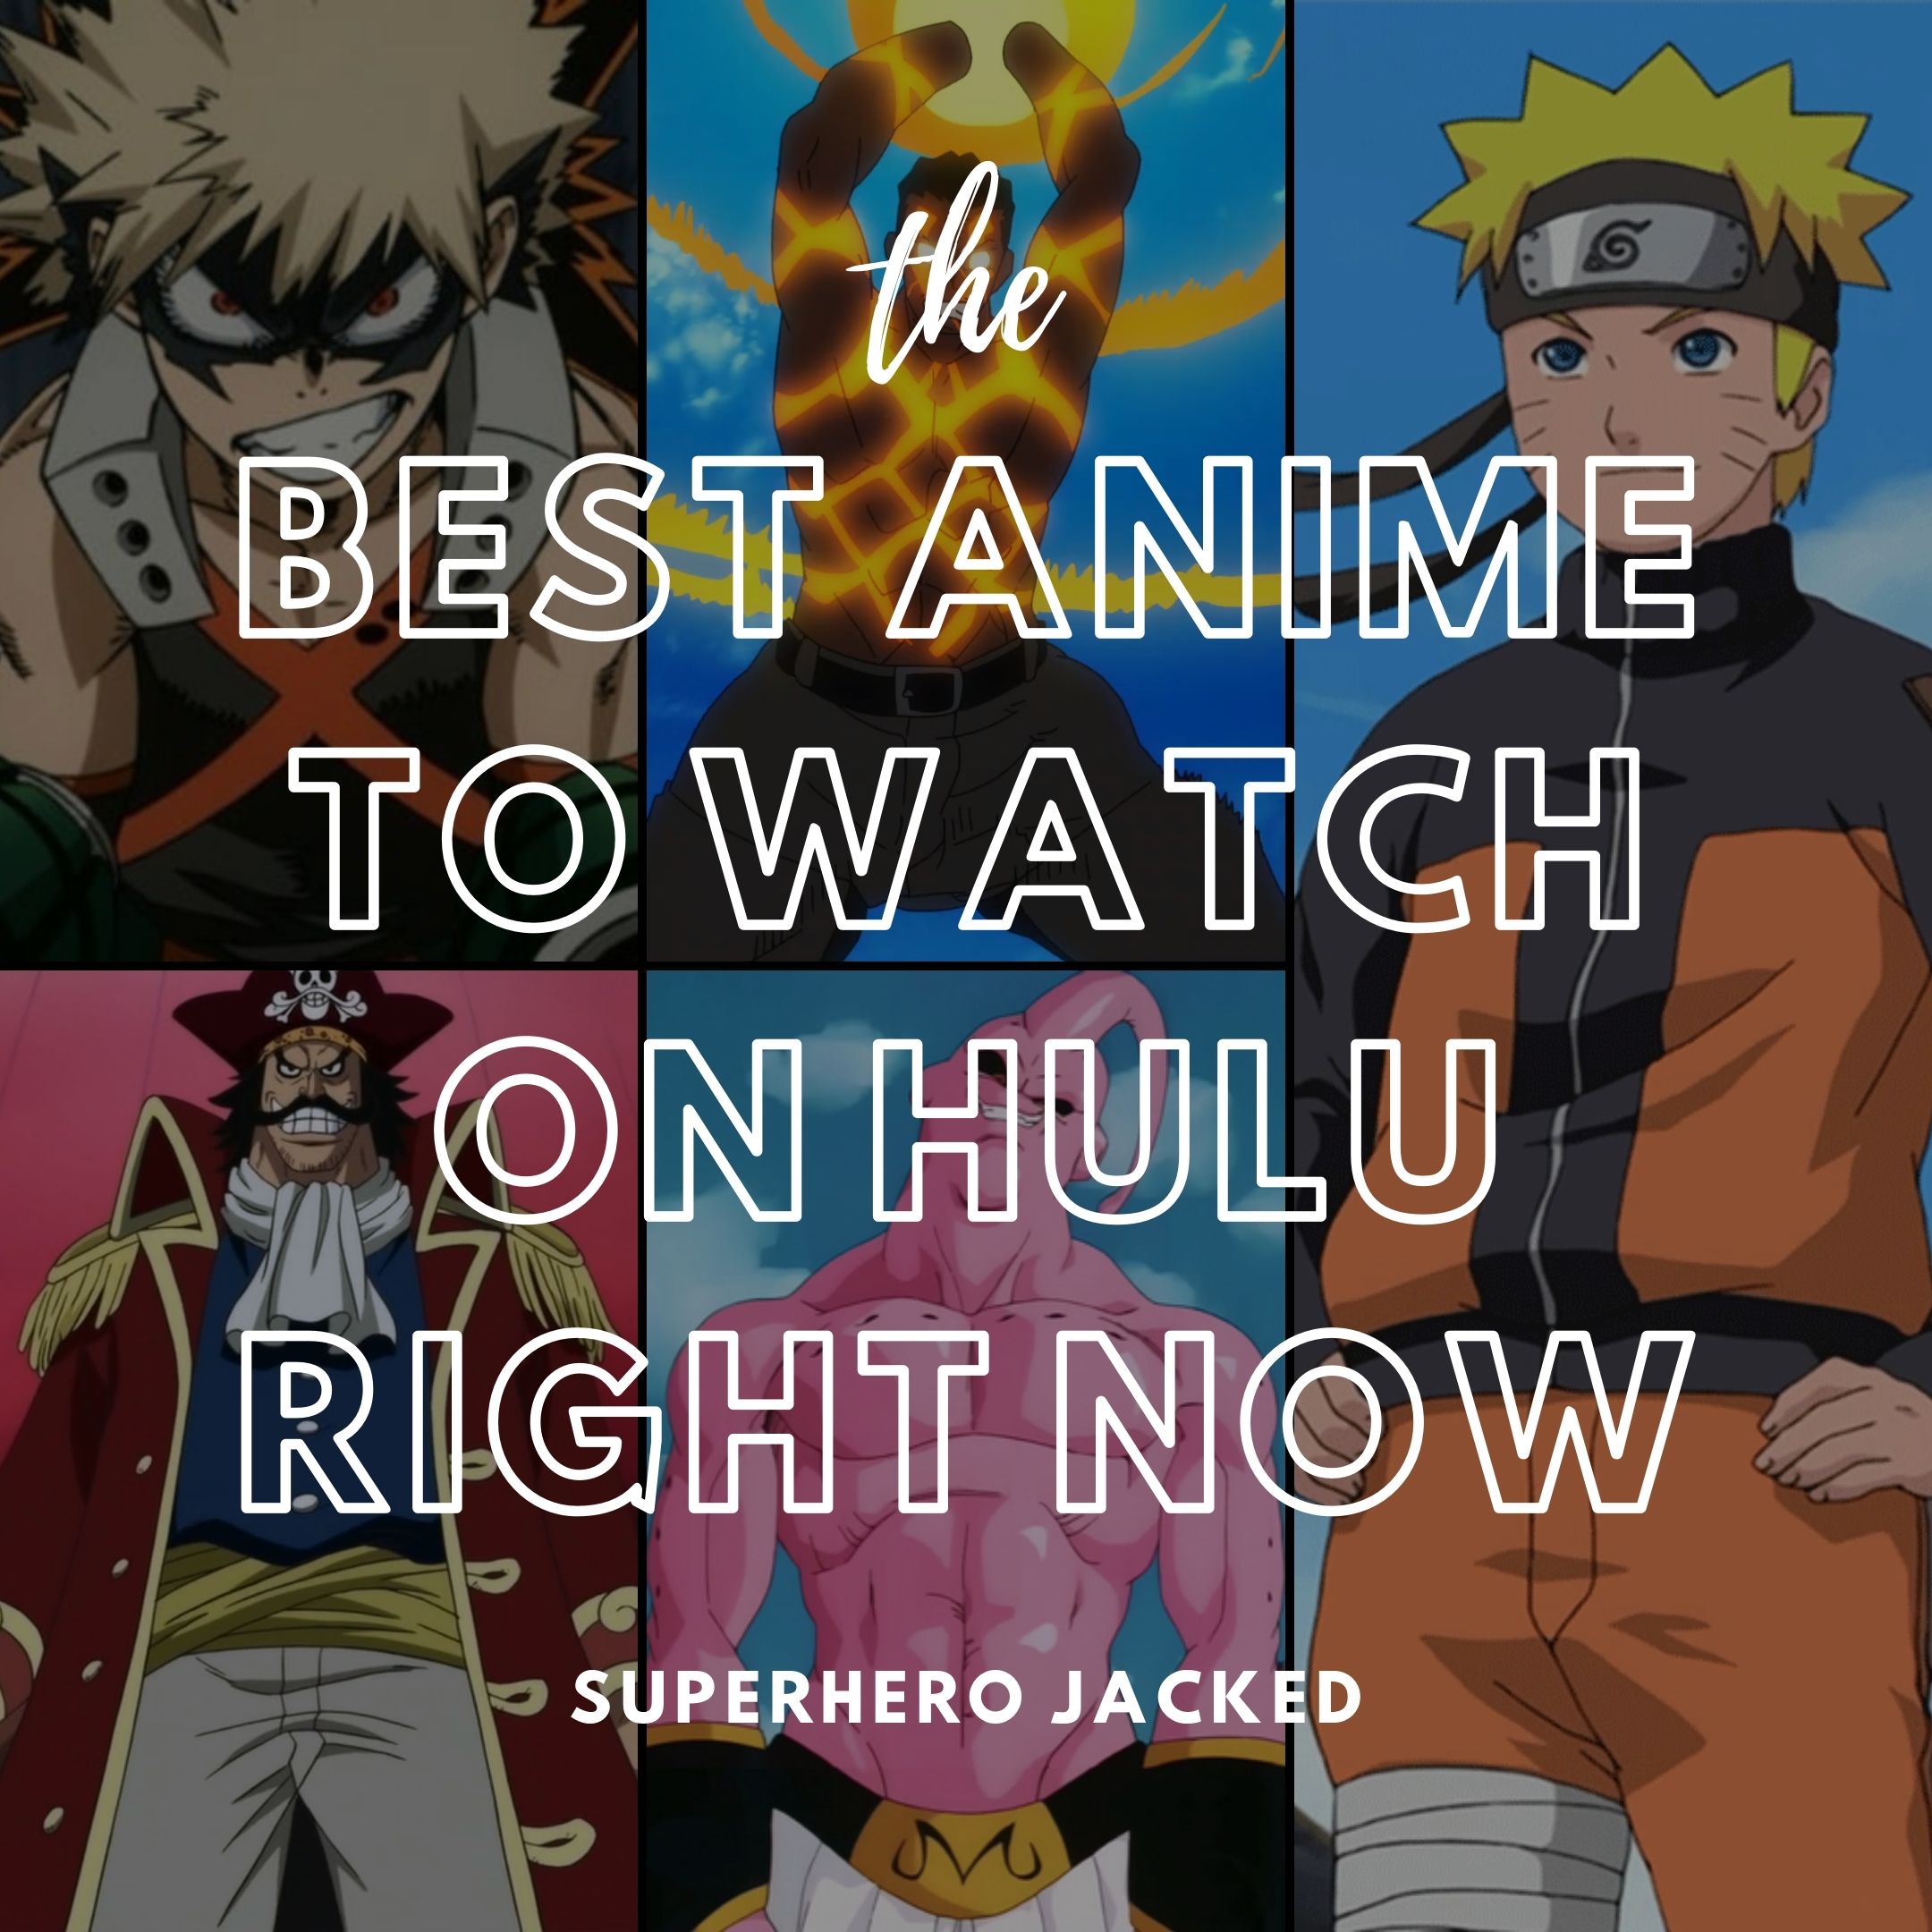 Best Anime to Watch on Hulu Right Now – Superhero Jacked